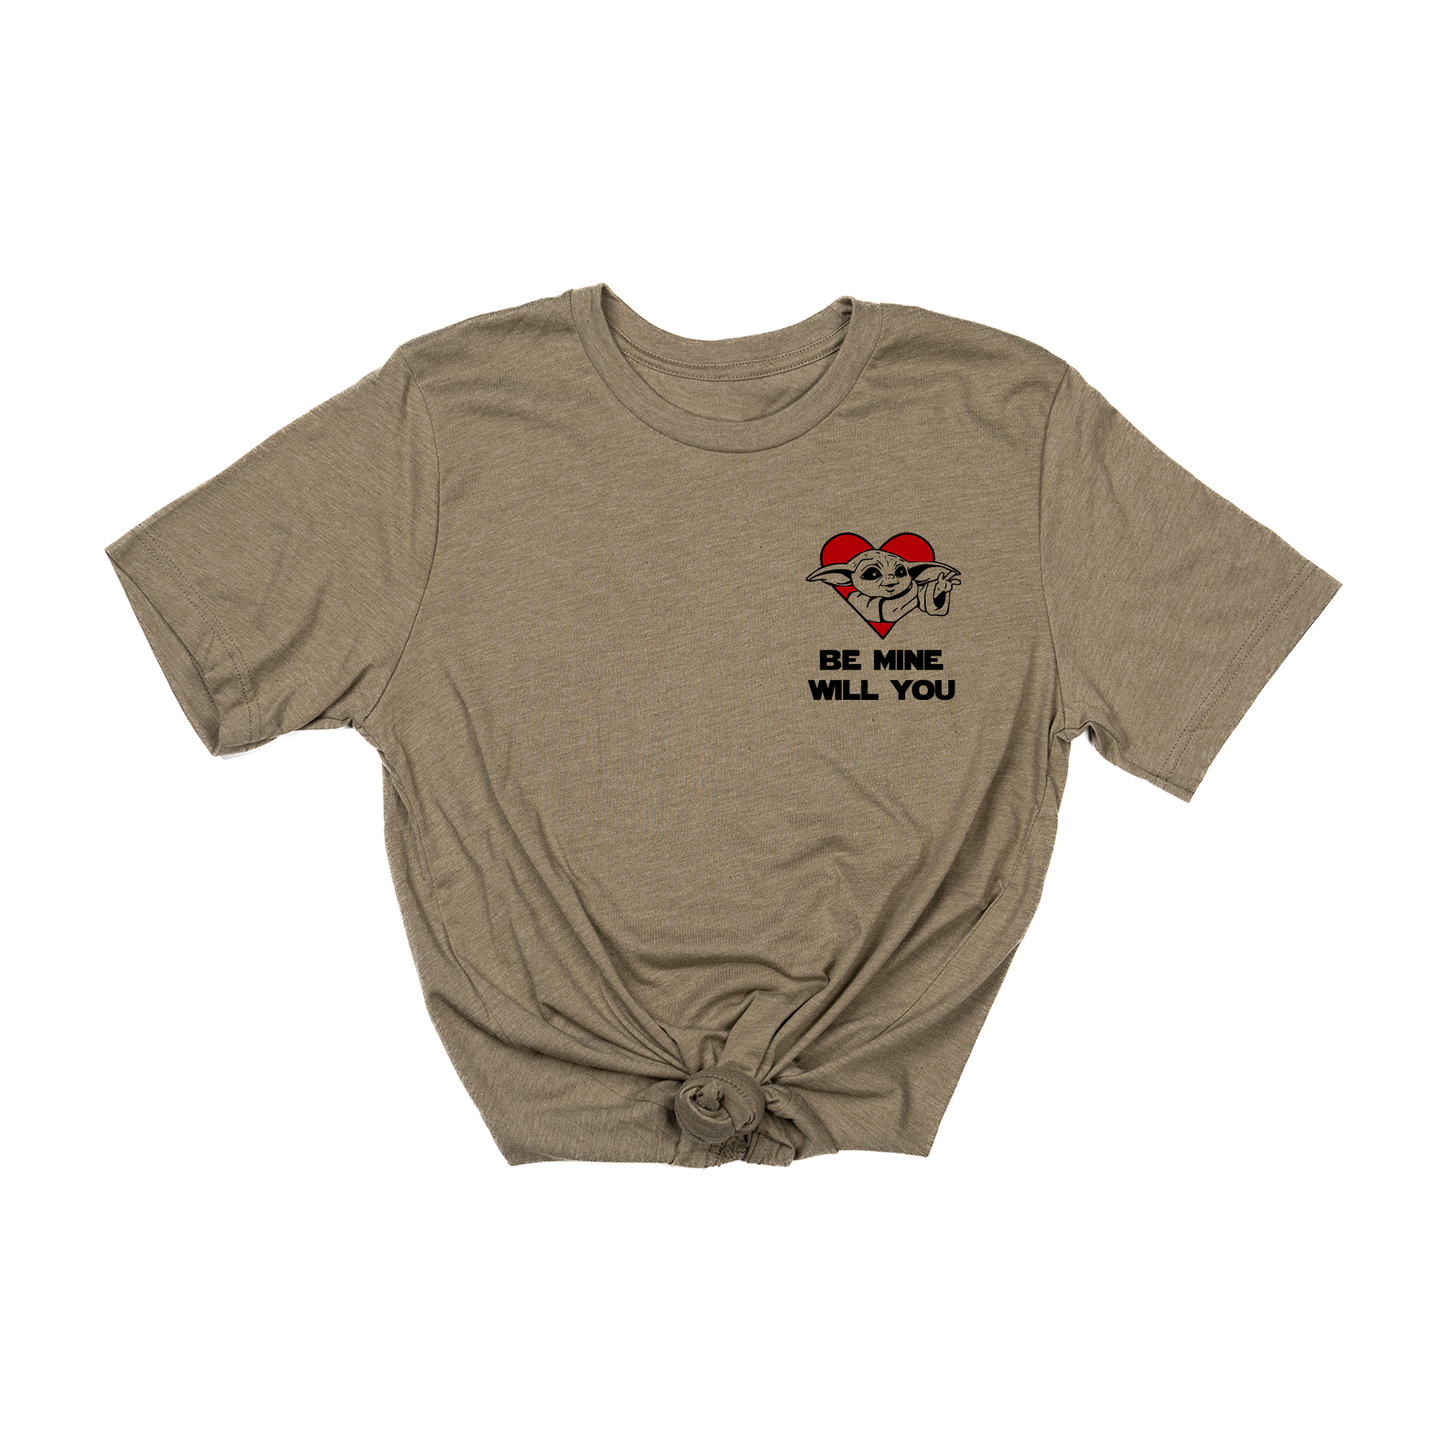 Be Mine Will You (Baby Yoda Inspired,  Pocket) - Tee (Olive)